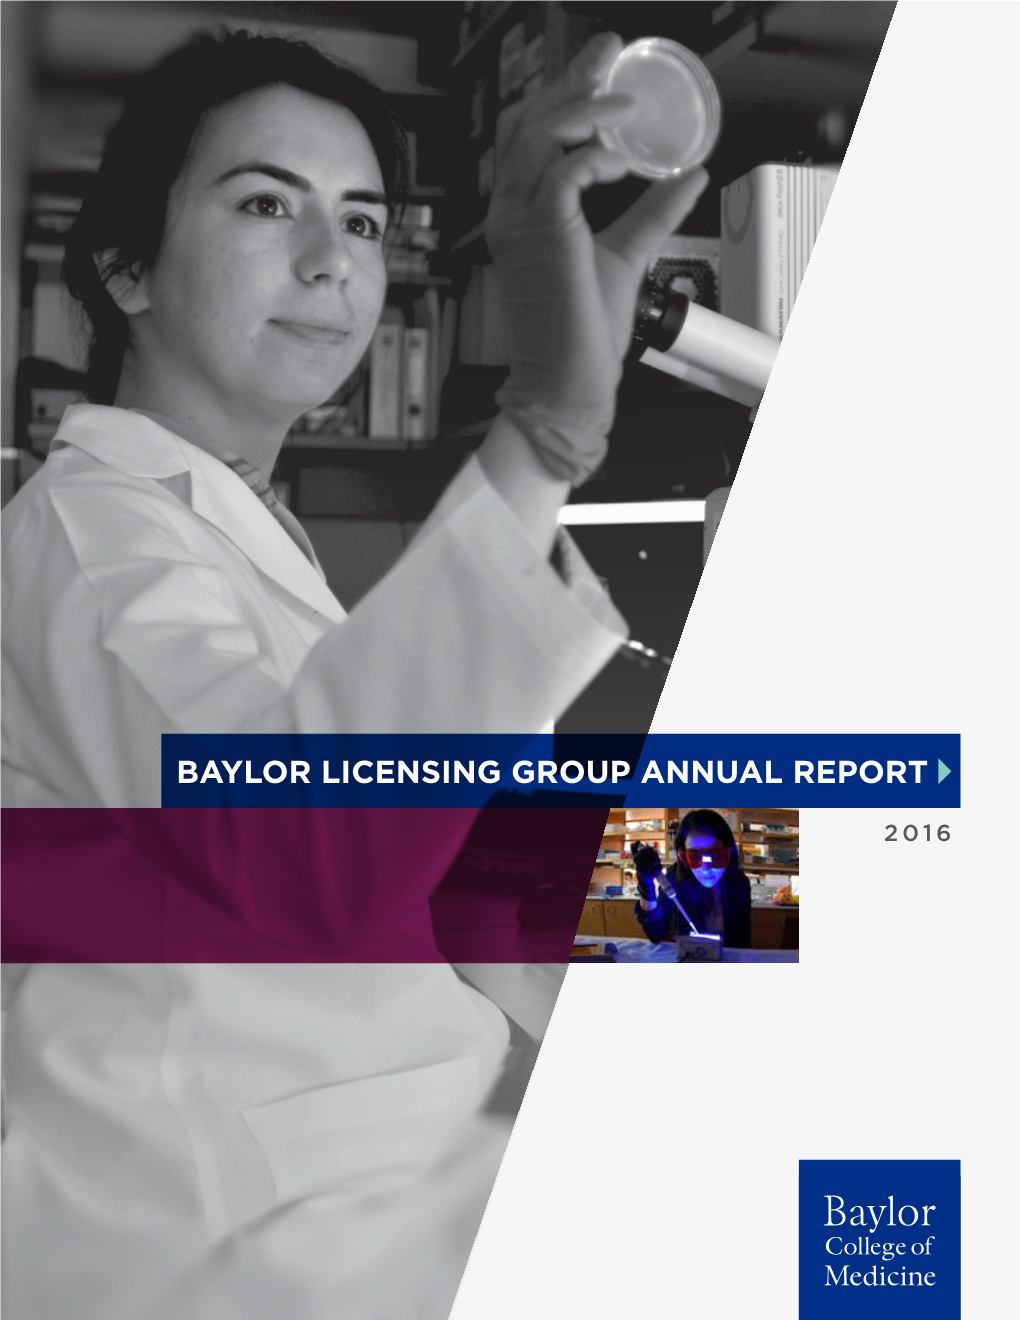 Baylor Licensing Group Annual Report